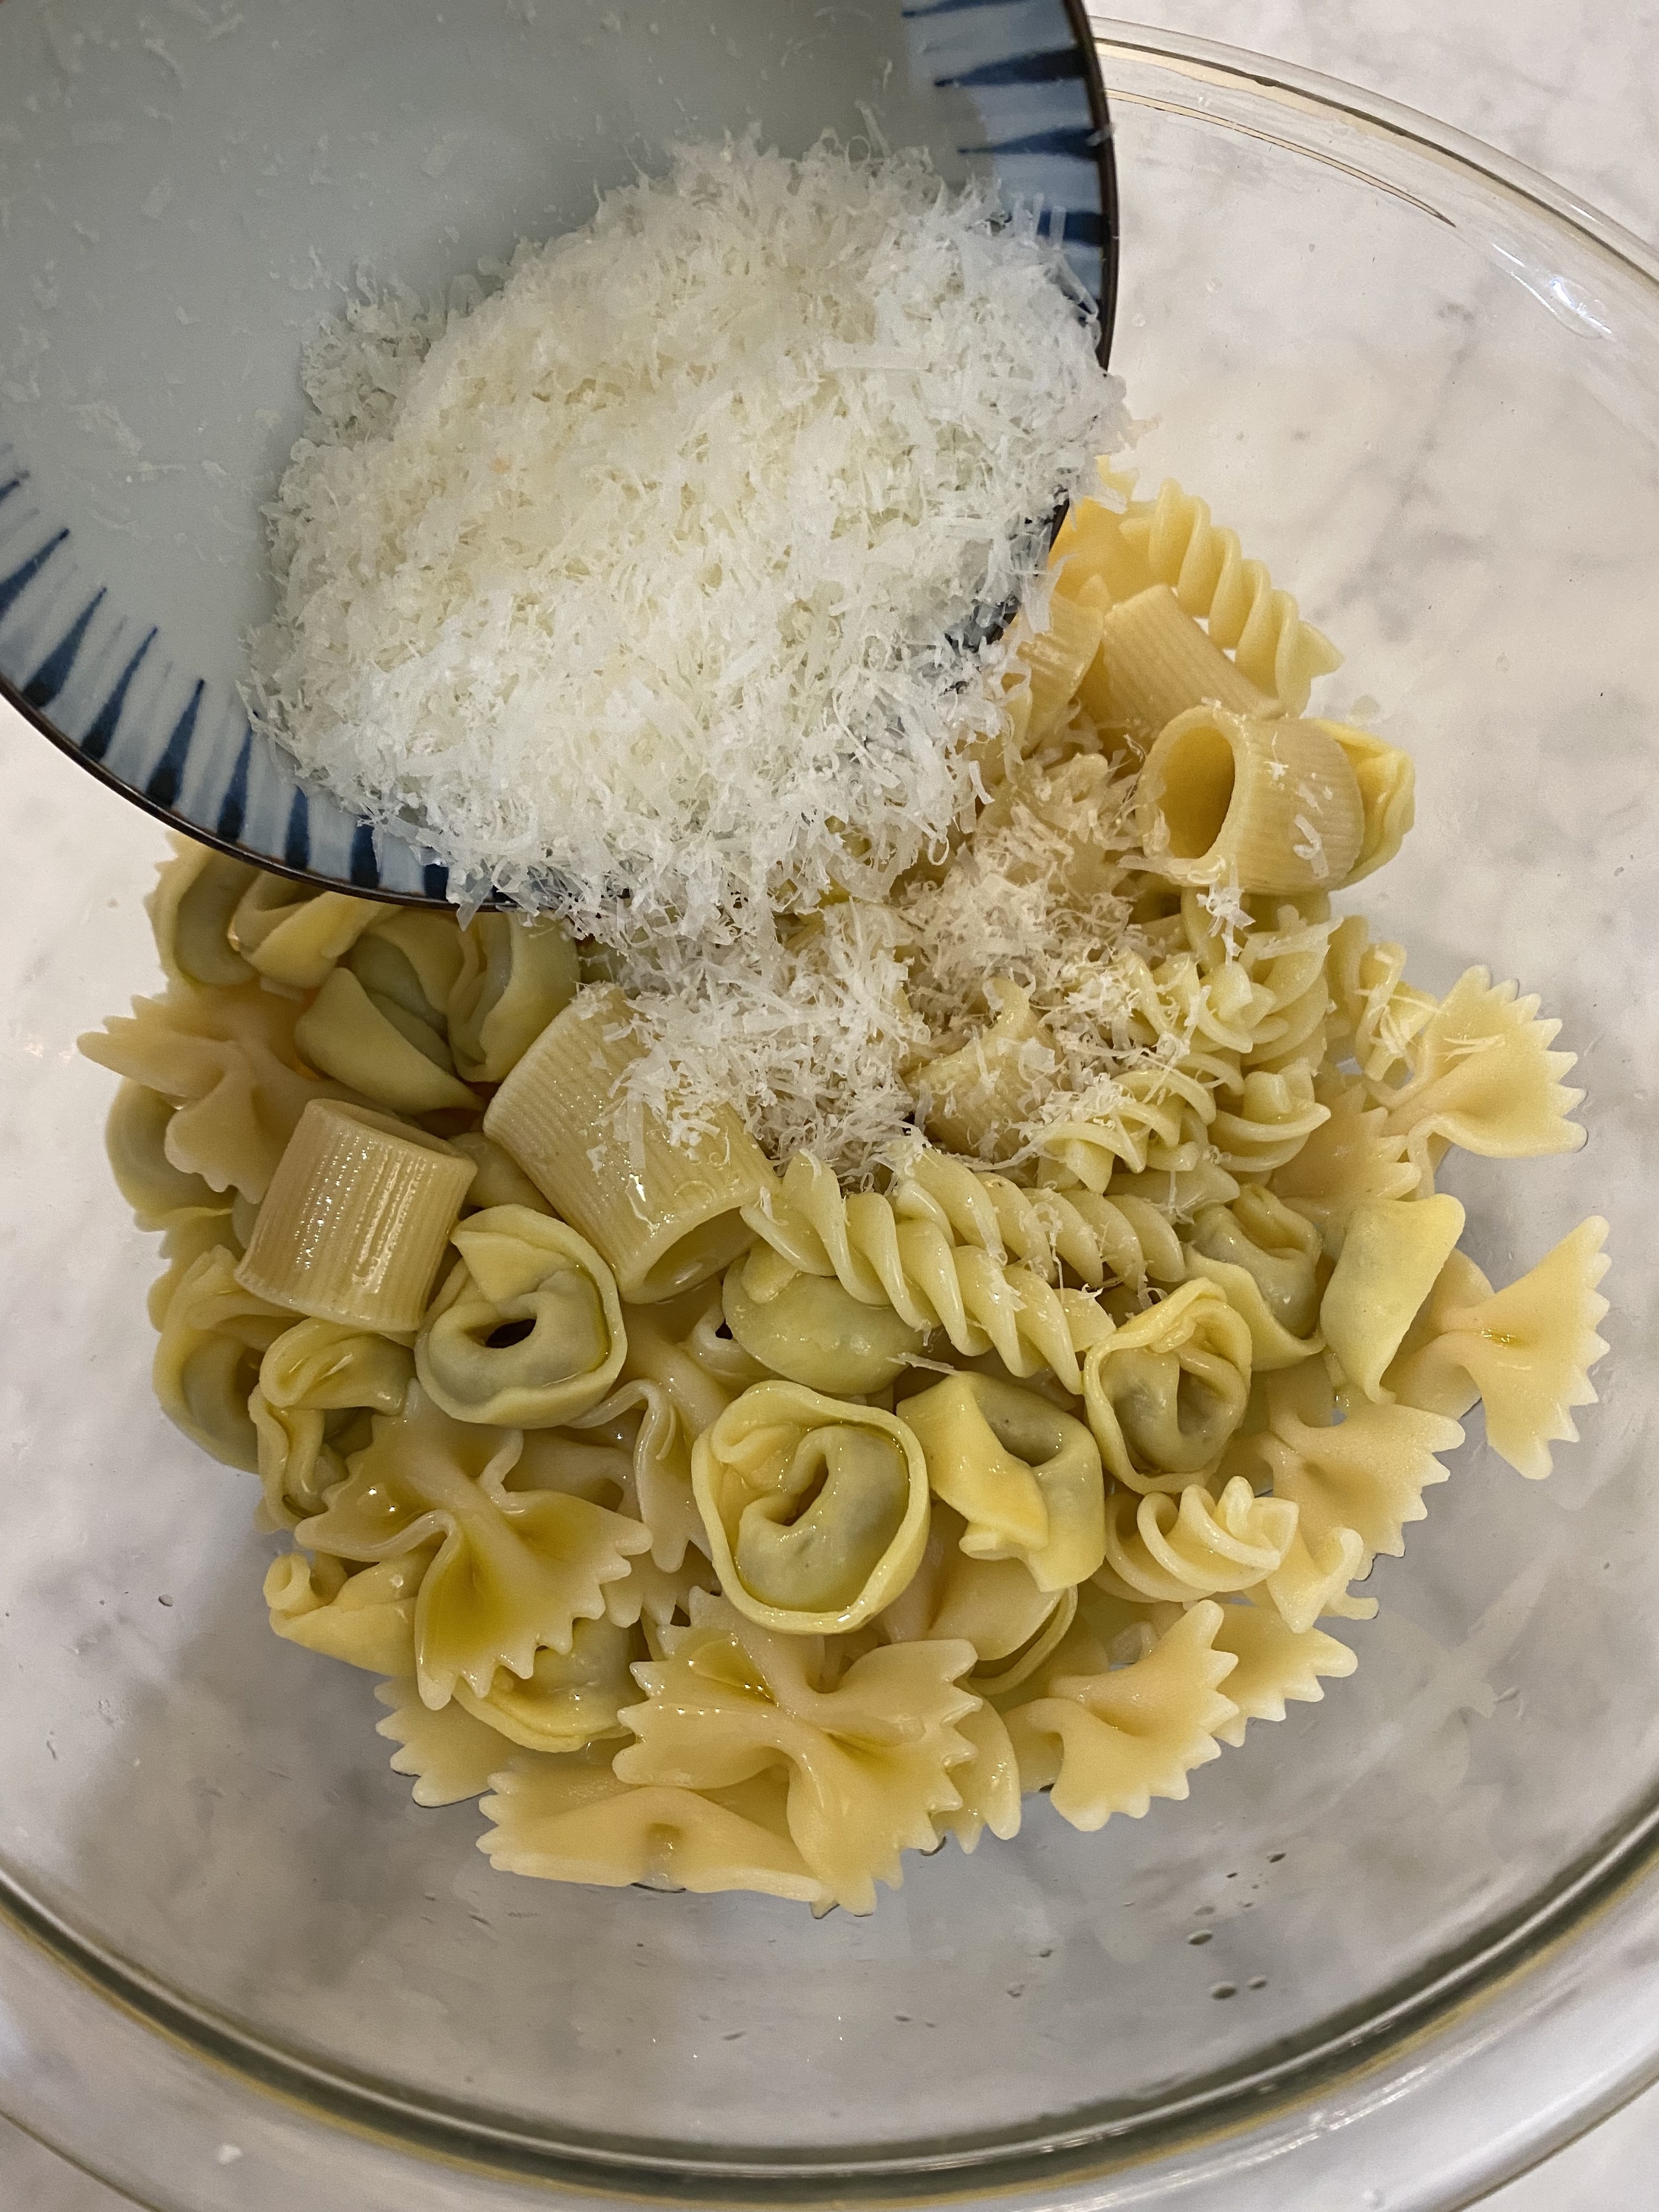 Pouring grated Parmesan cheese onto cooked pasta.